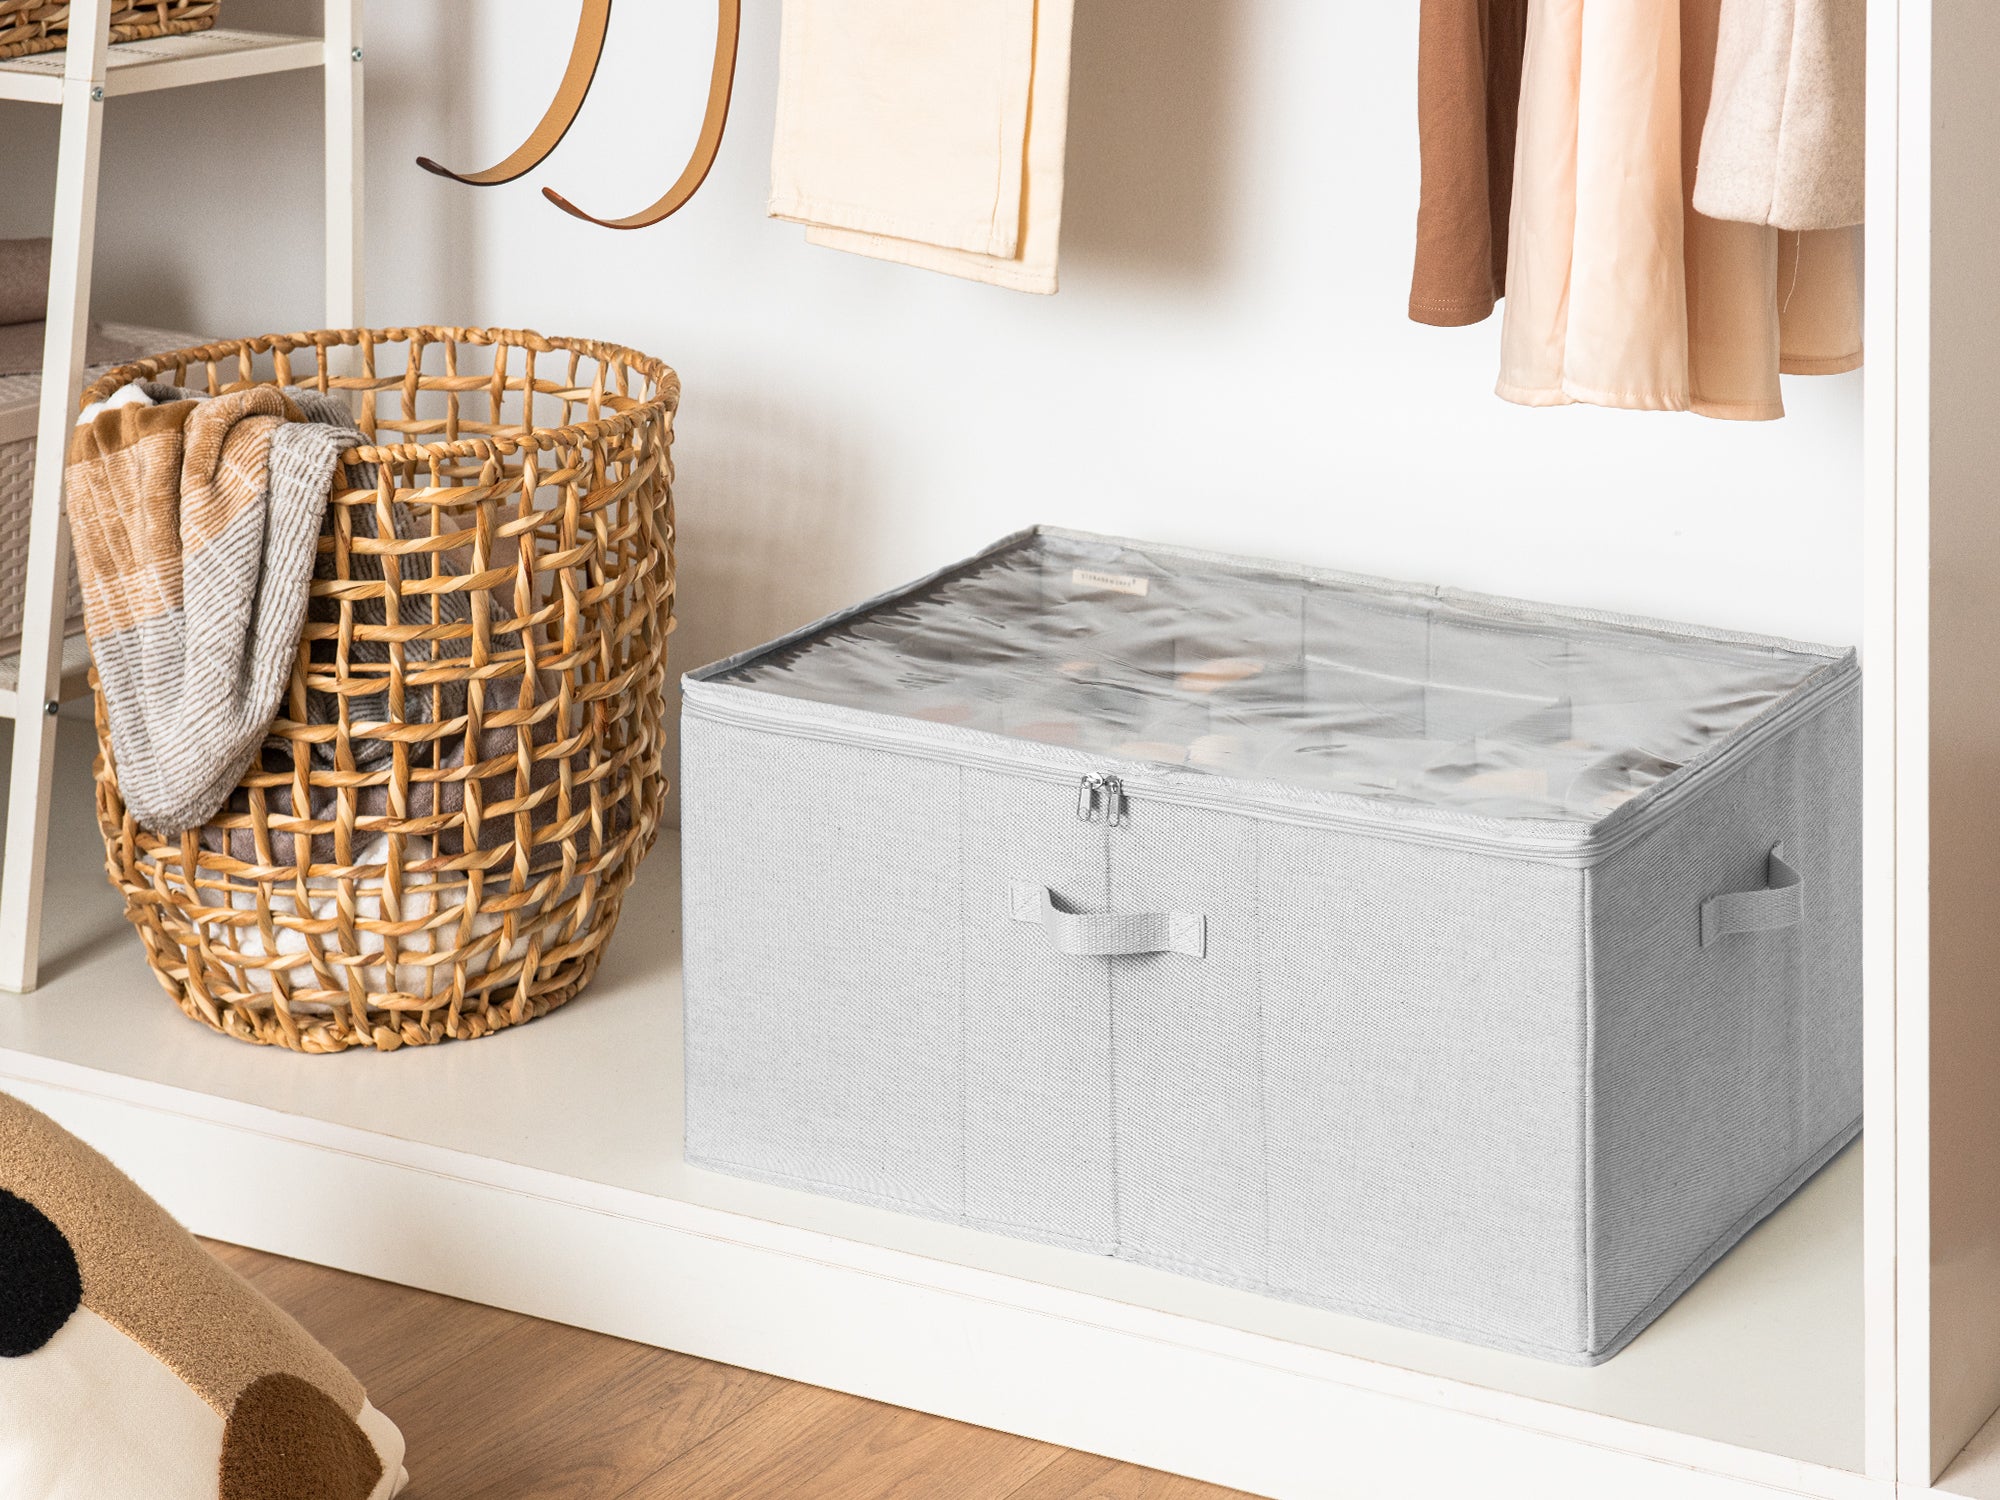 Large gray shoe storage organizer placed at the bottom of a closet beside a wicker basket